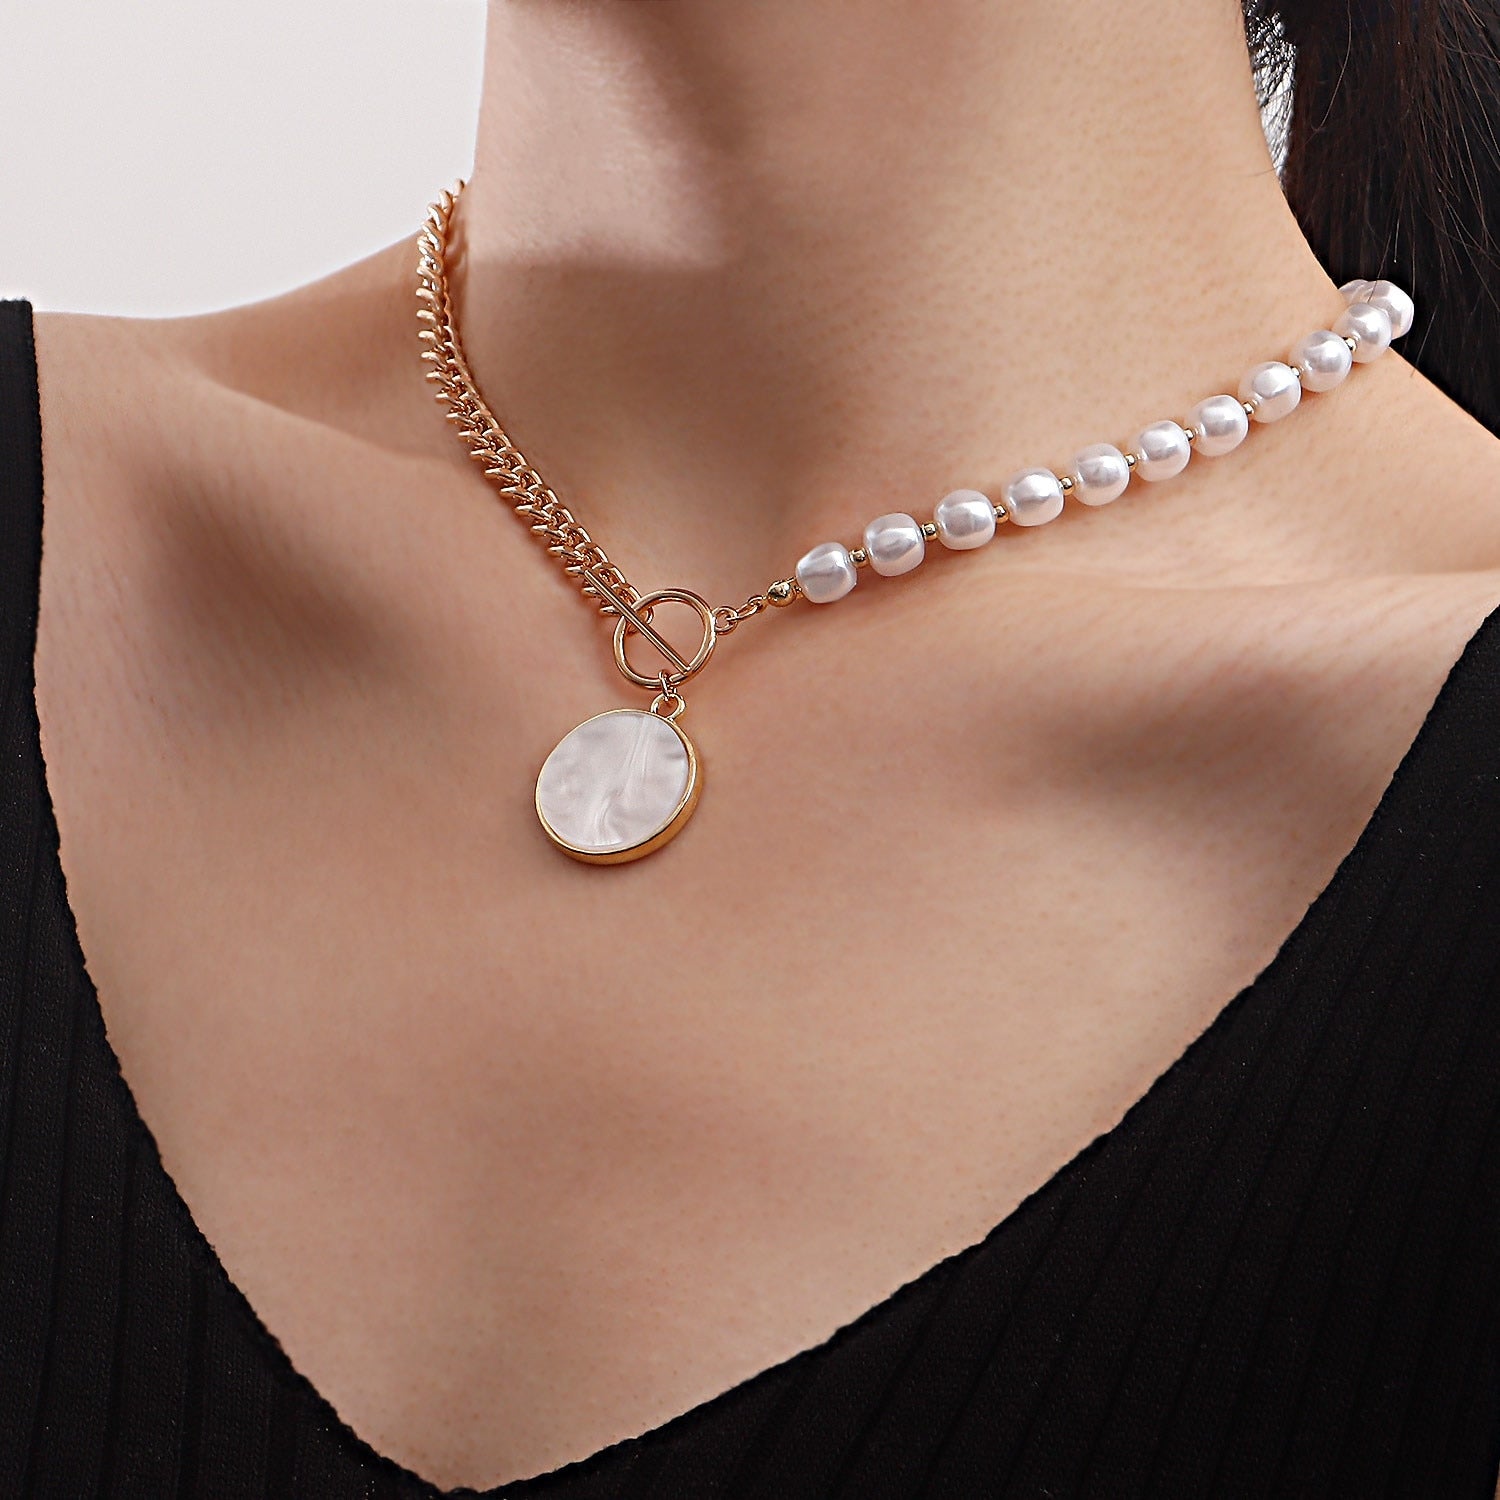 Pearl Beads Pendant Necklace